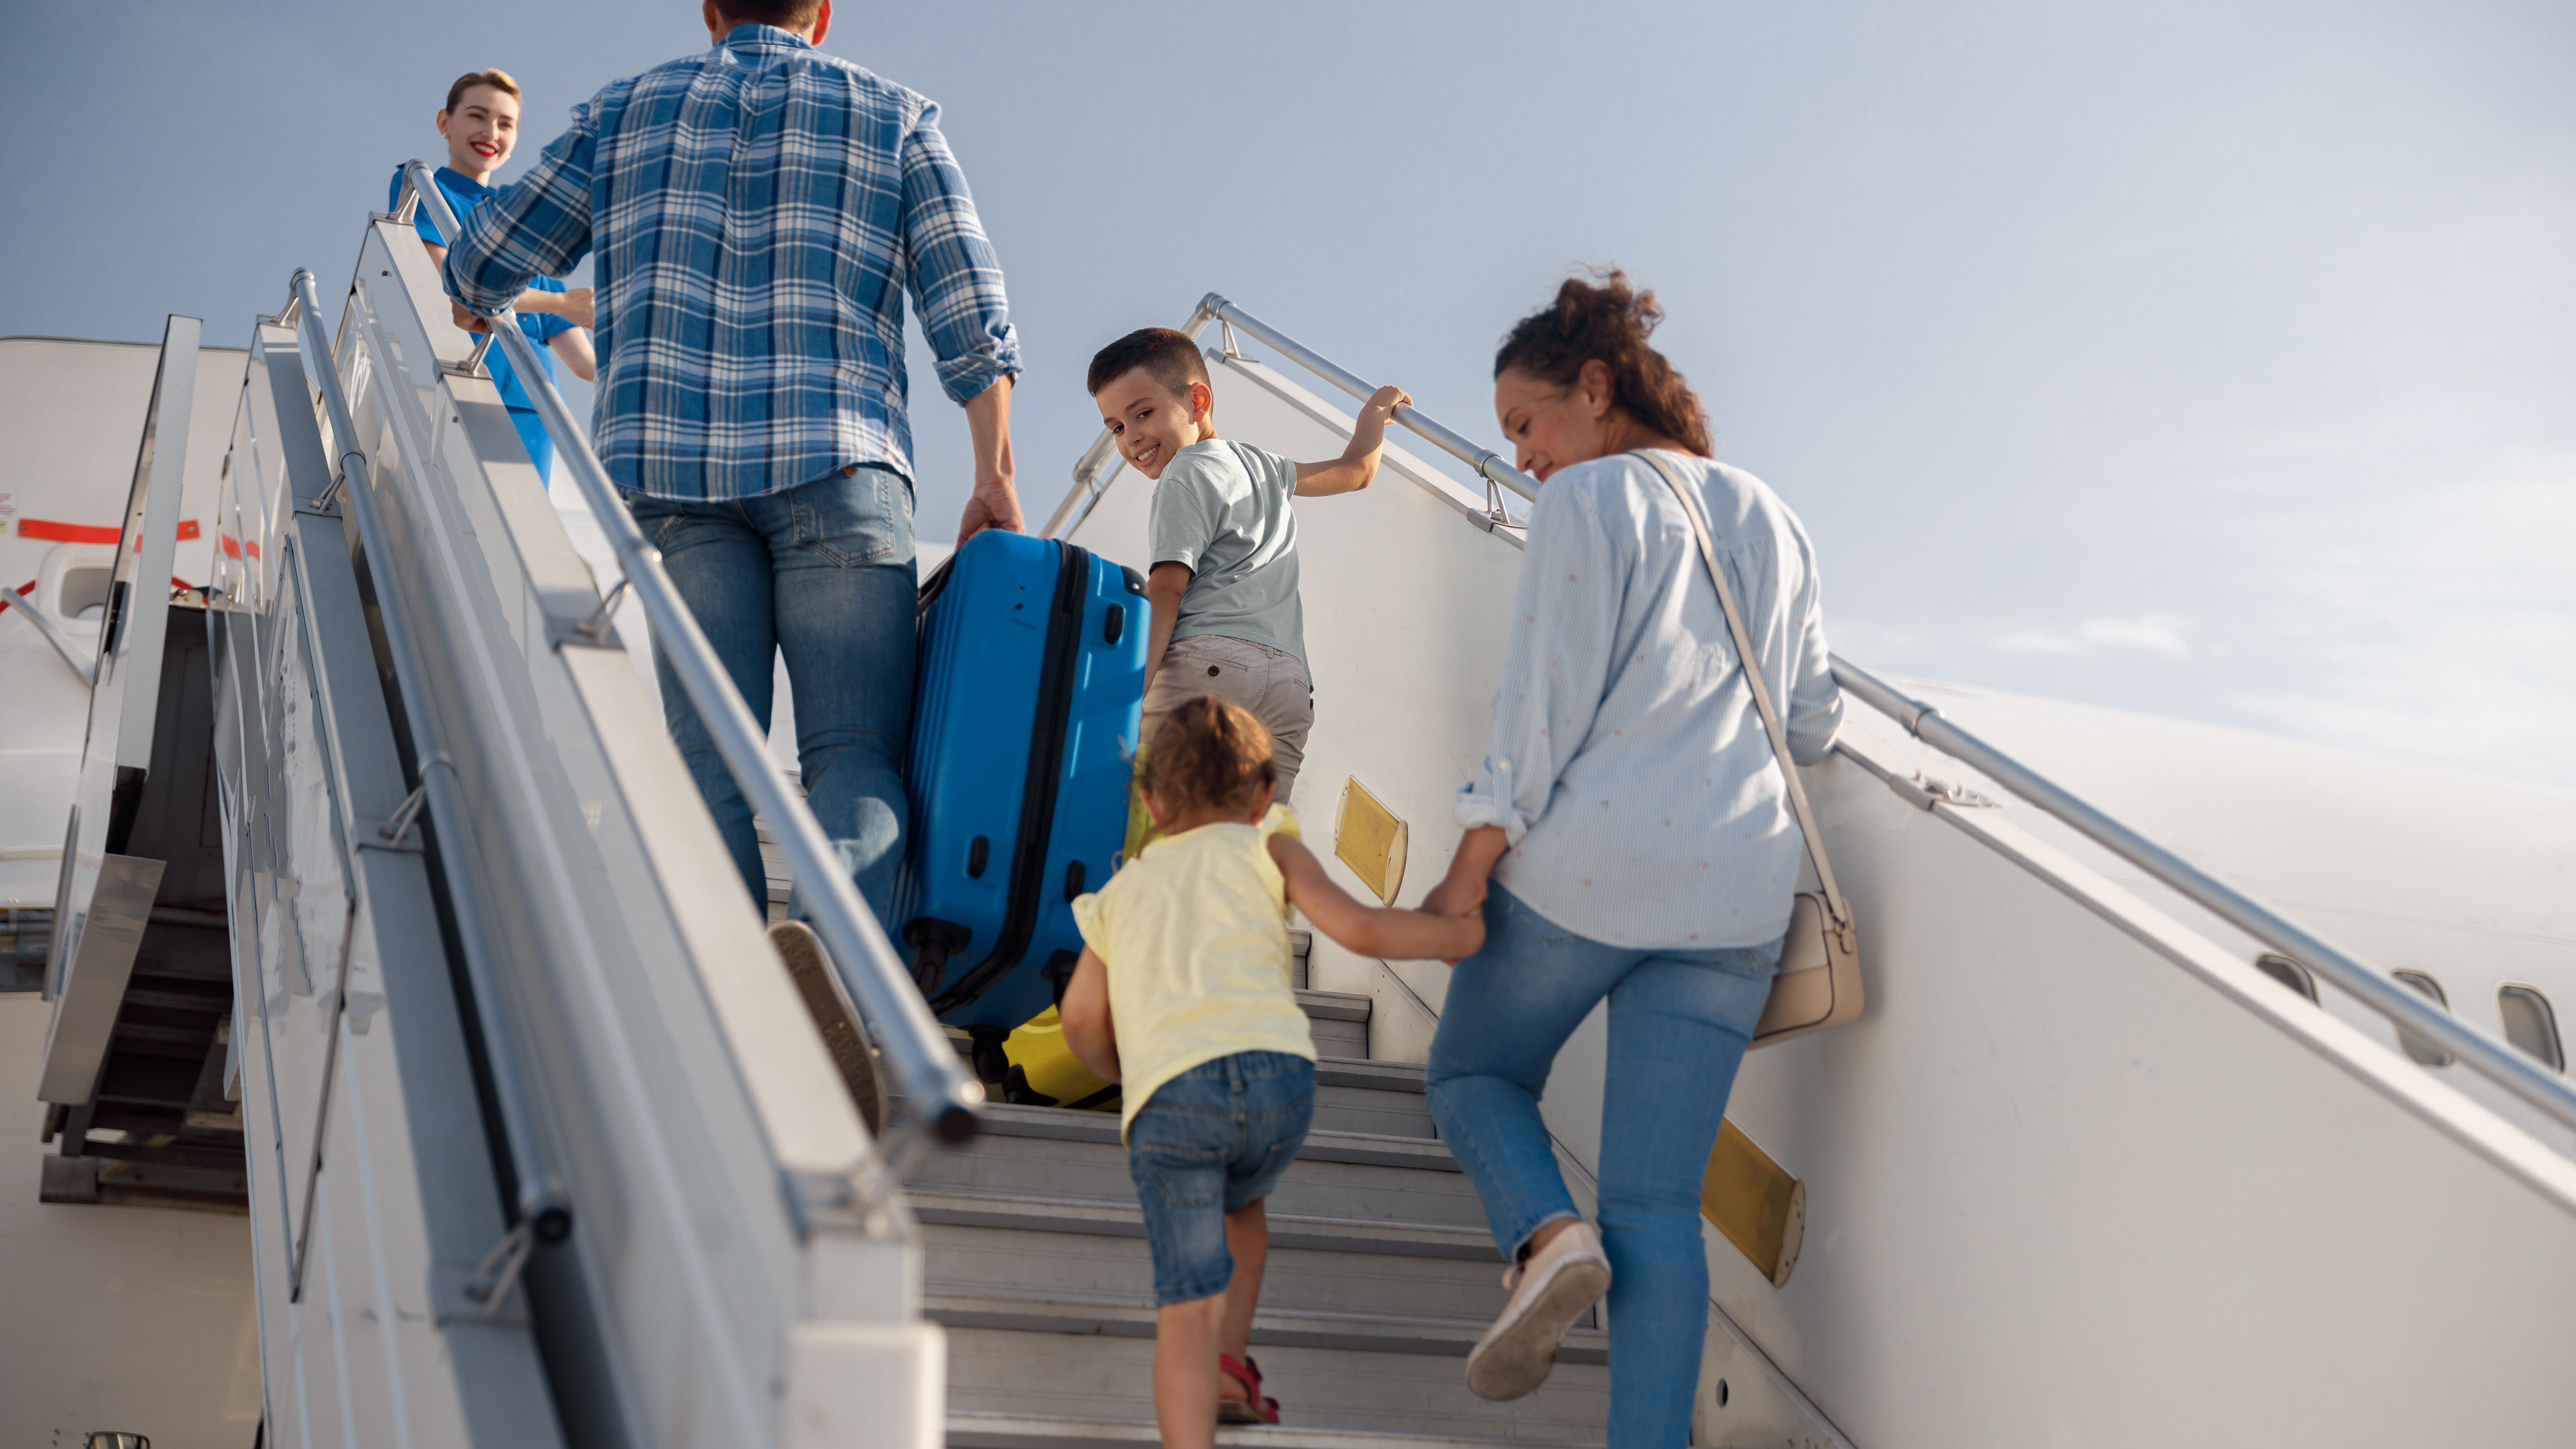 A Father, Mother, and Two Children boarding an aircraft.